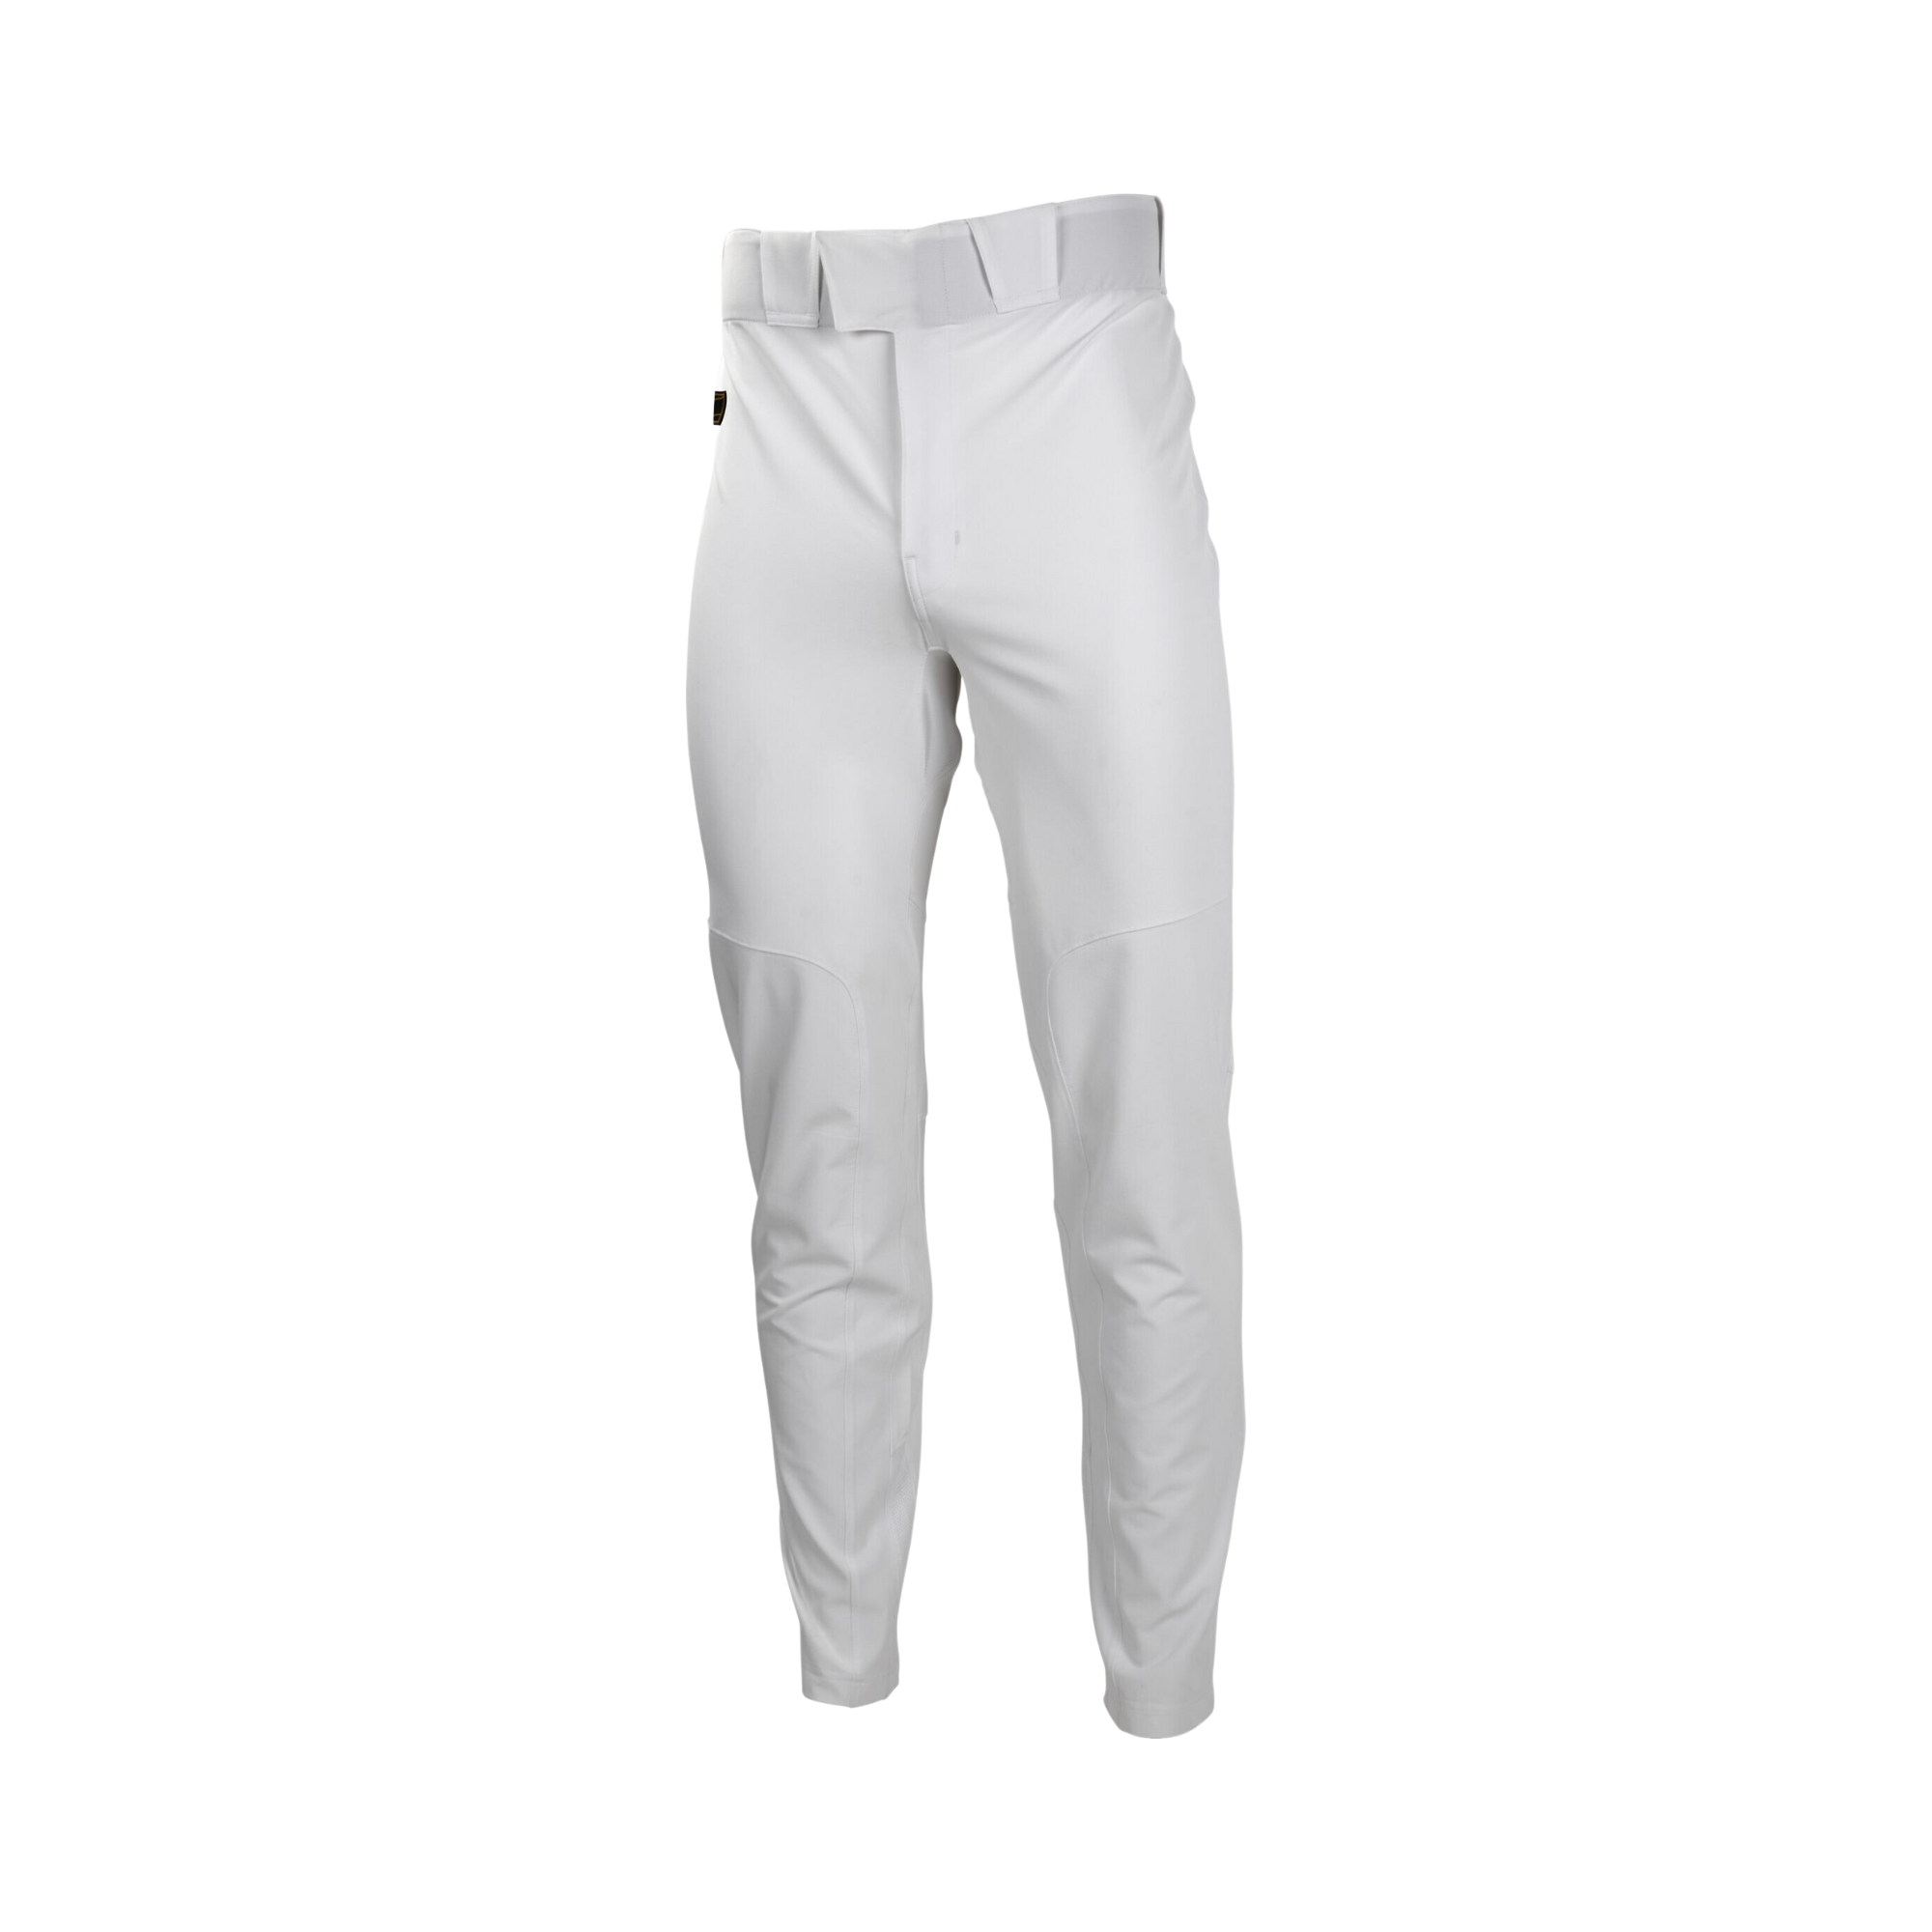 Rawlings Gold Collection Athletic Fit Performance Baseball Pants White